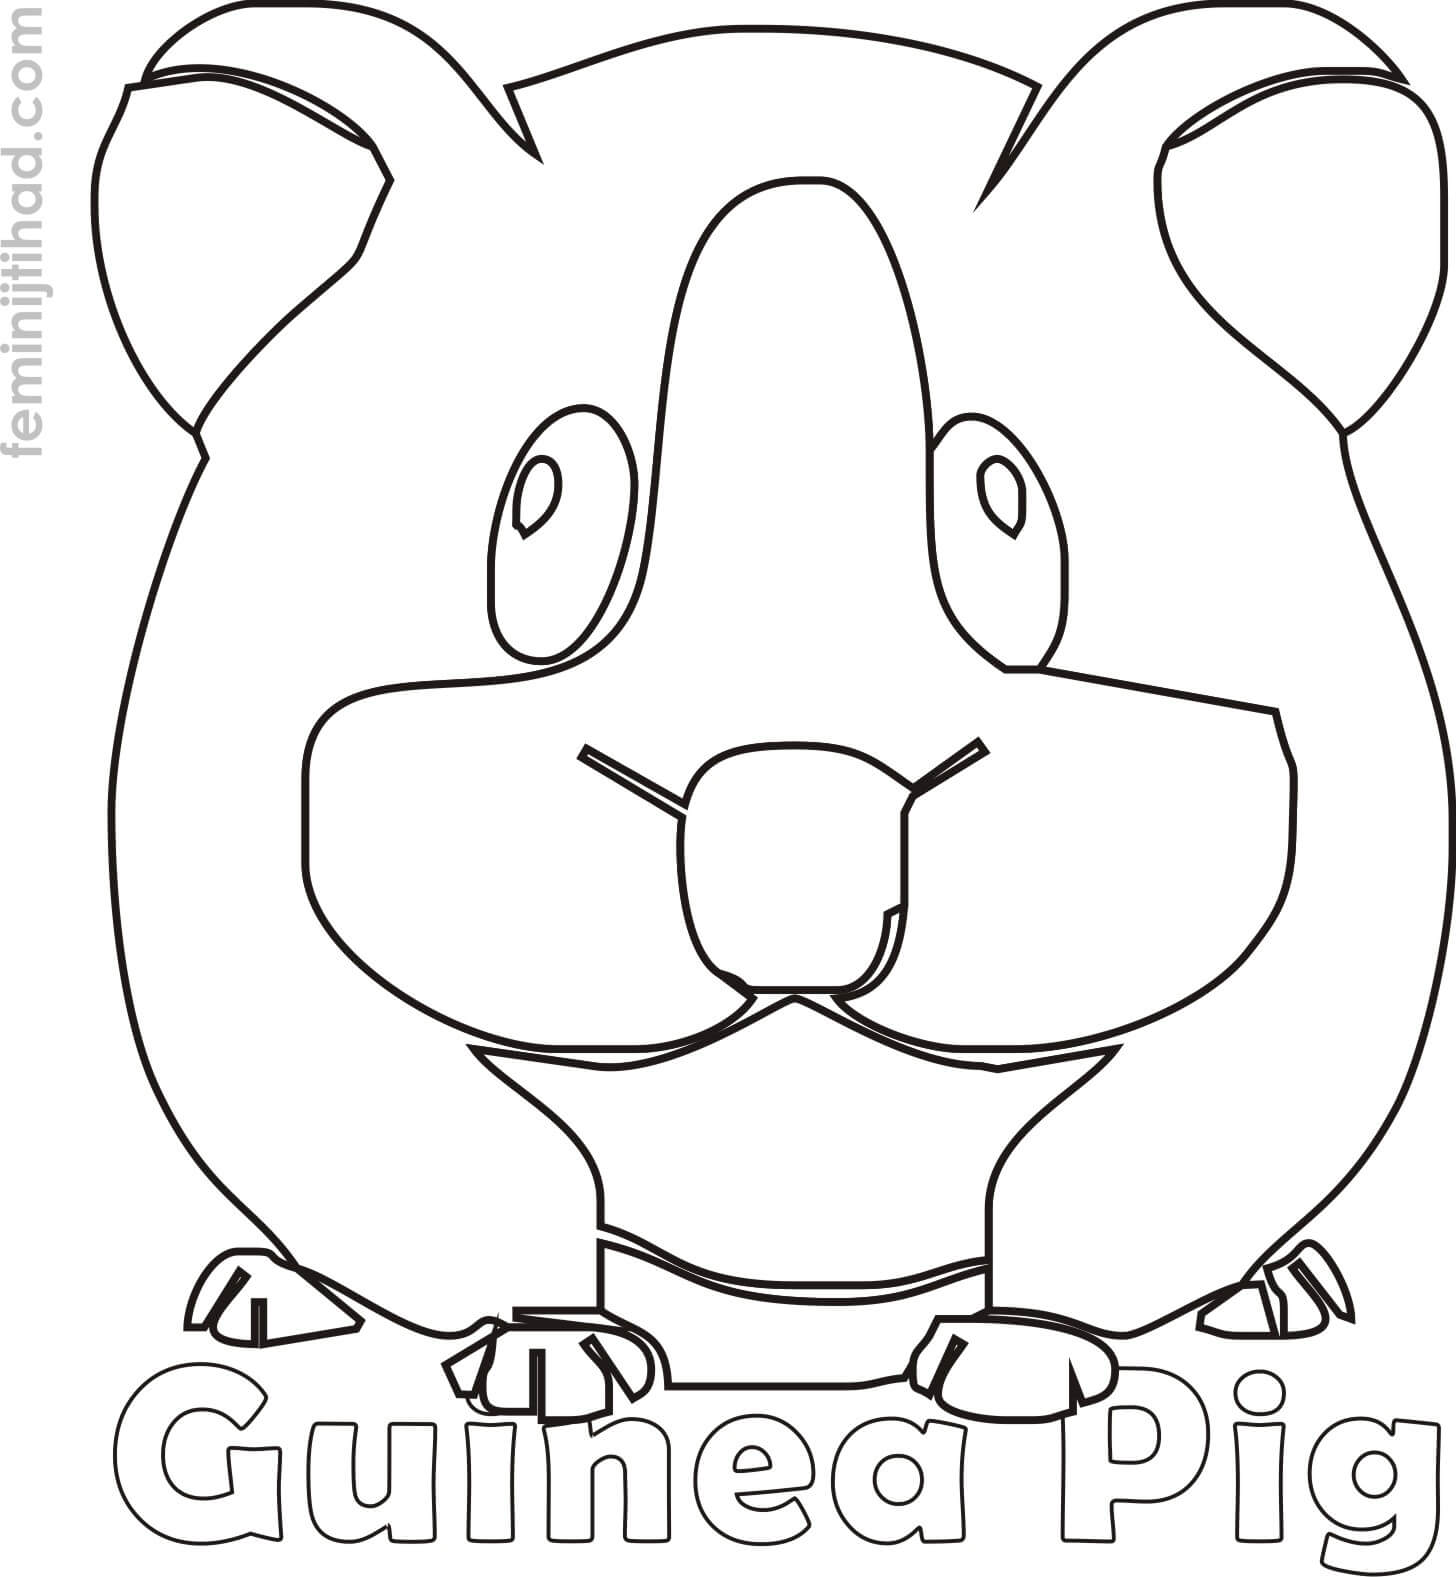 Guinea Pig coloring page printable